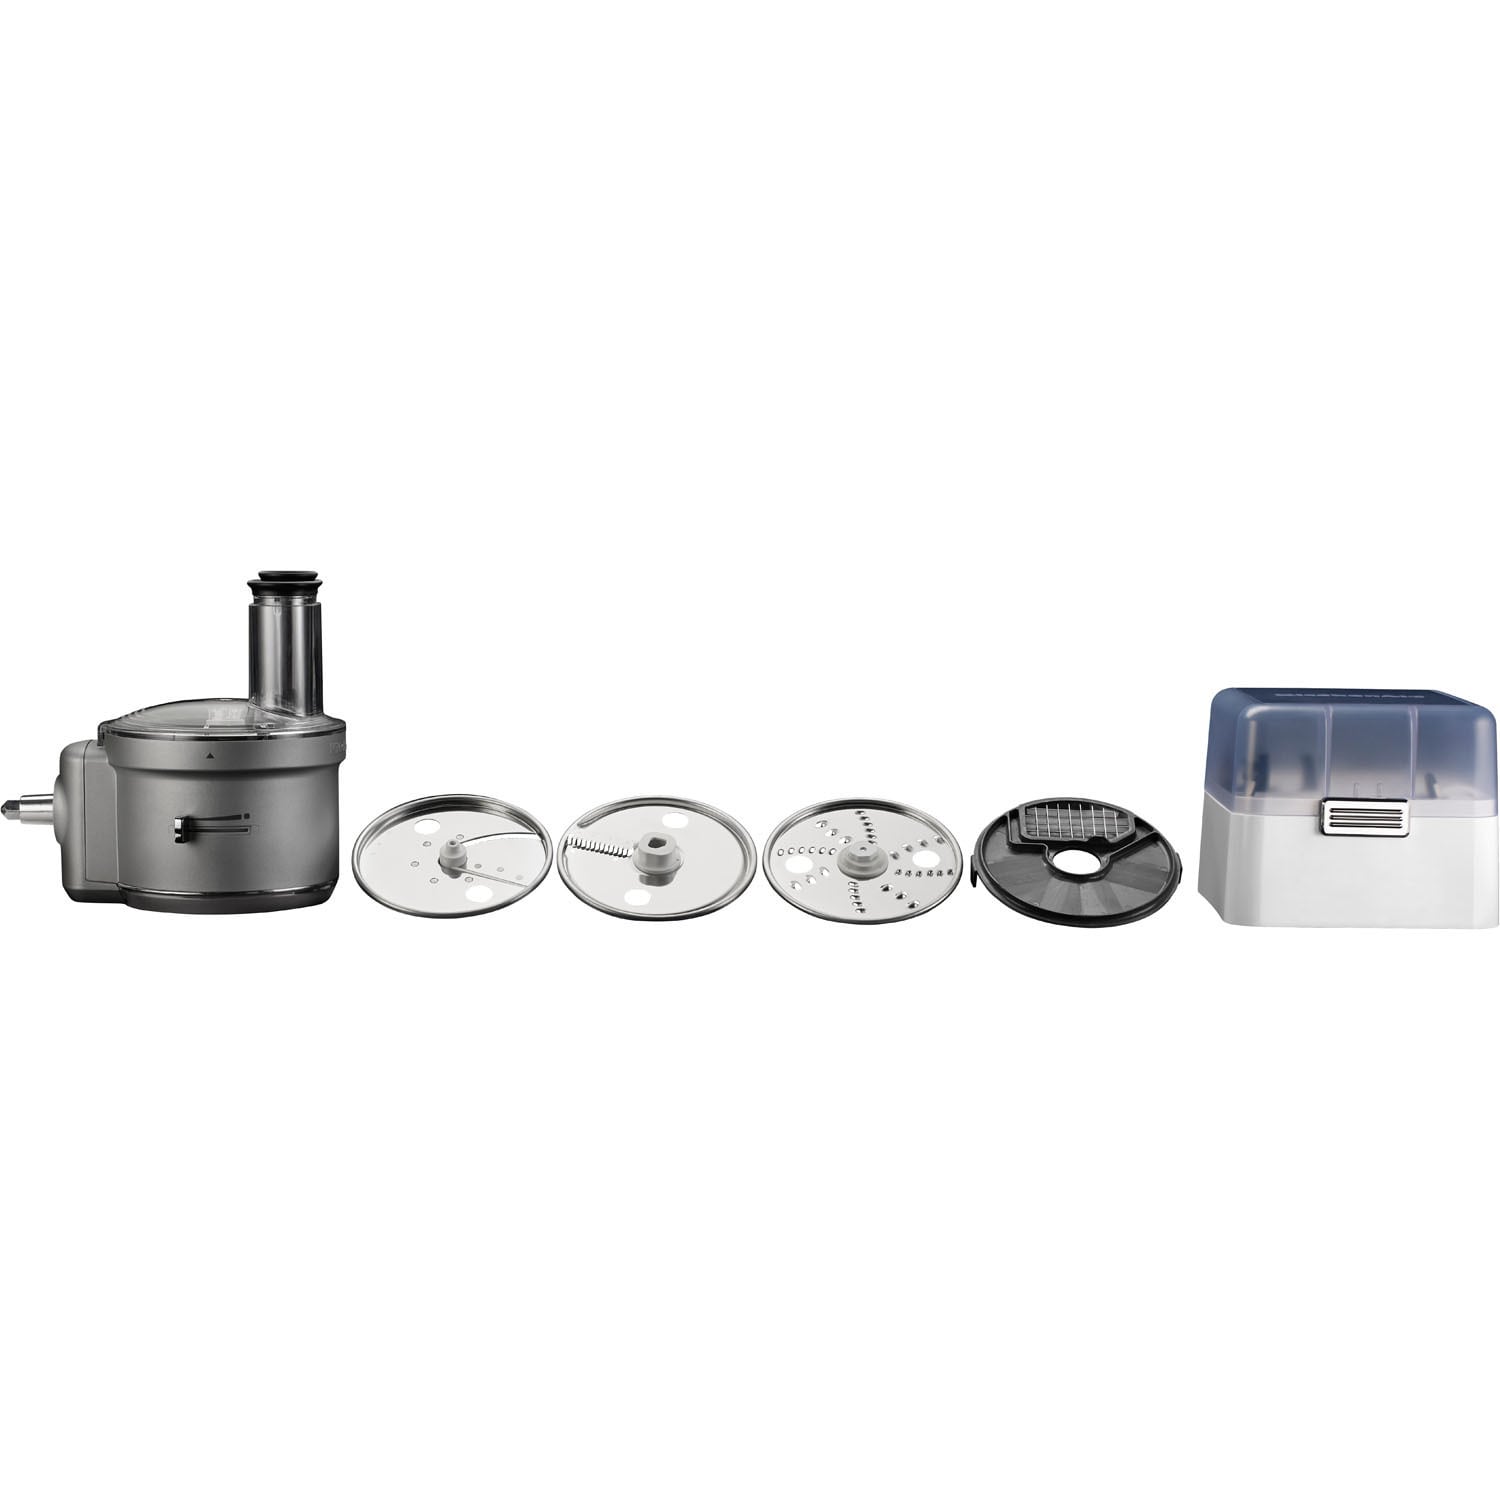 https://ak1.ostkcdn.com/images/products/9319117/KitchenAid-KSM2FPA-Food-Processor-Attachment-with-Commercial-Style-Dicing-Kit-56805b60-3a72-49fc-830a-ef1e707893ec.jpg